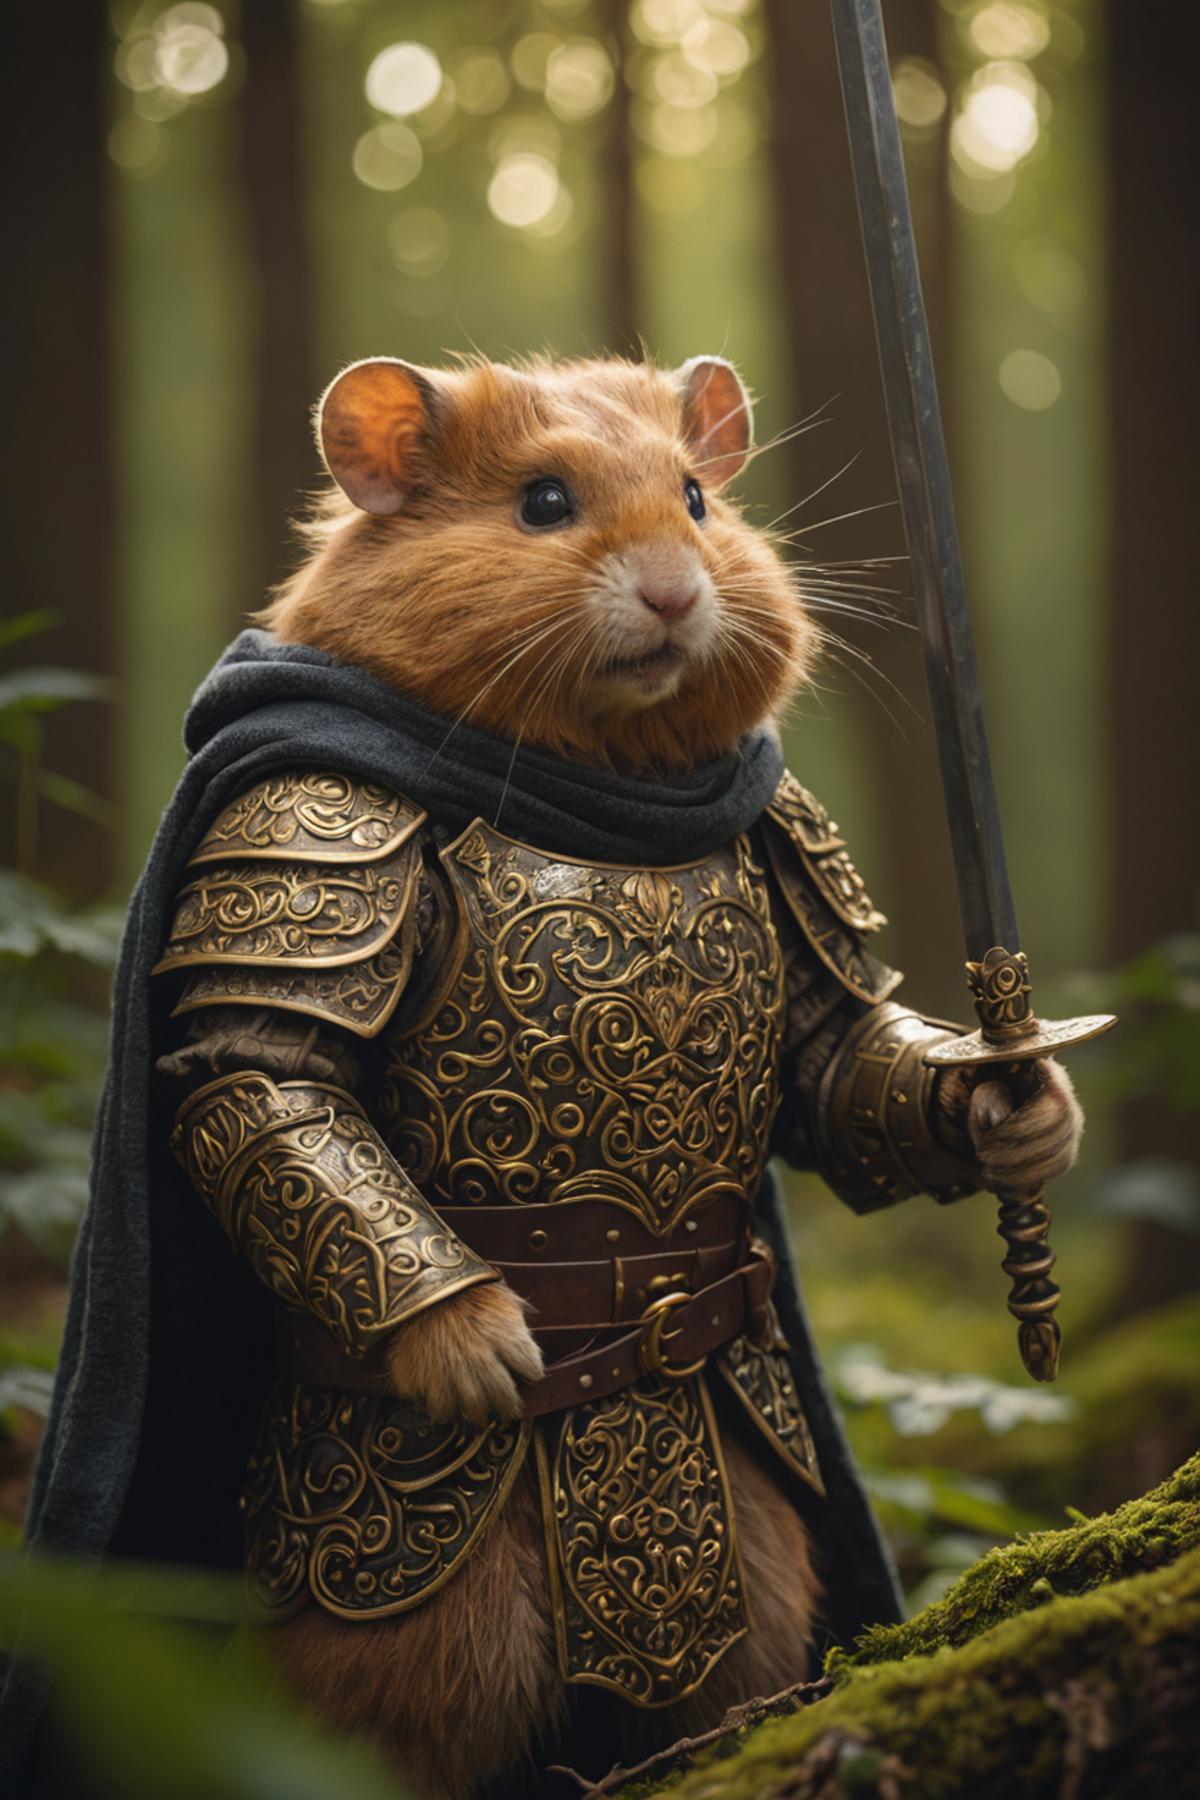 A hamster wearing a knight's armor and holding a sword.